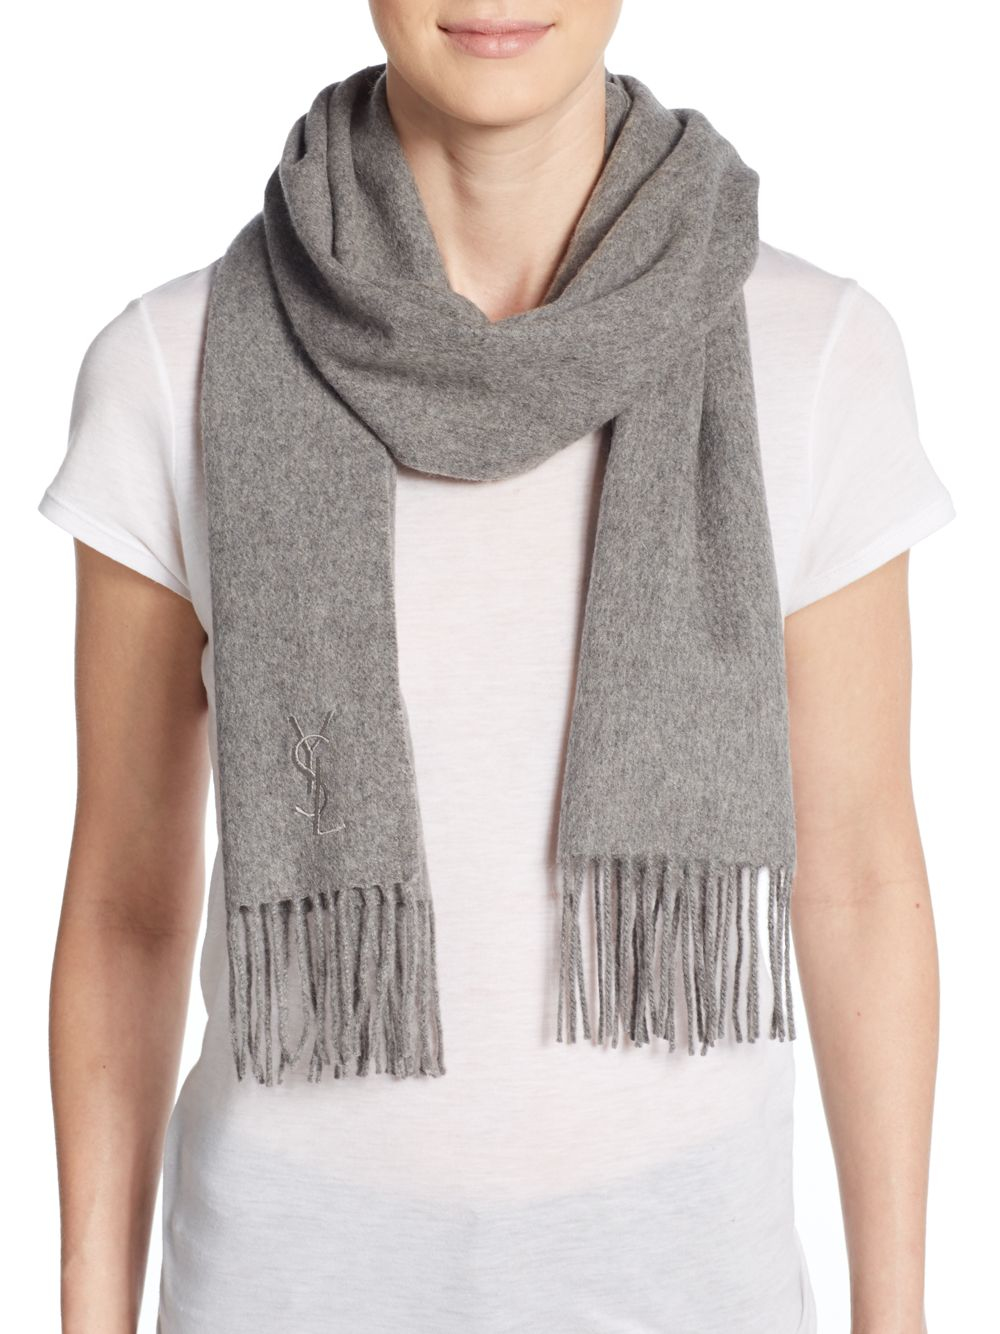 Lyst - Saint Laurent Wool & Cashmere Scarf in Gray